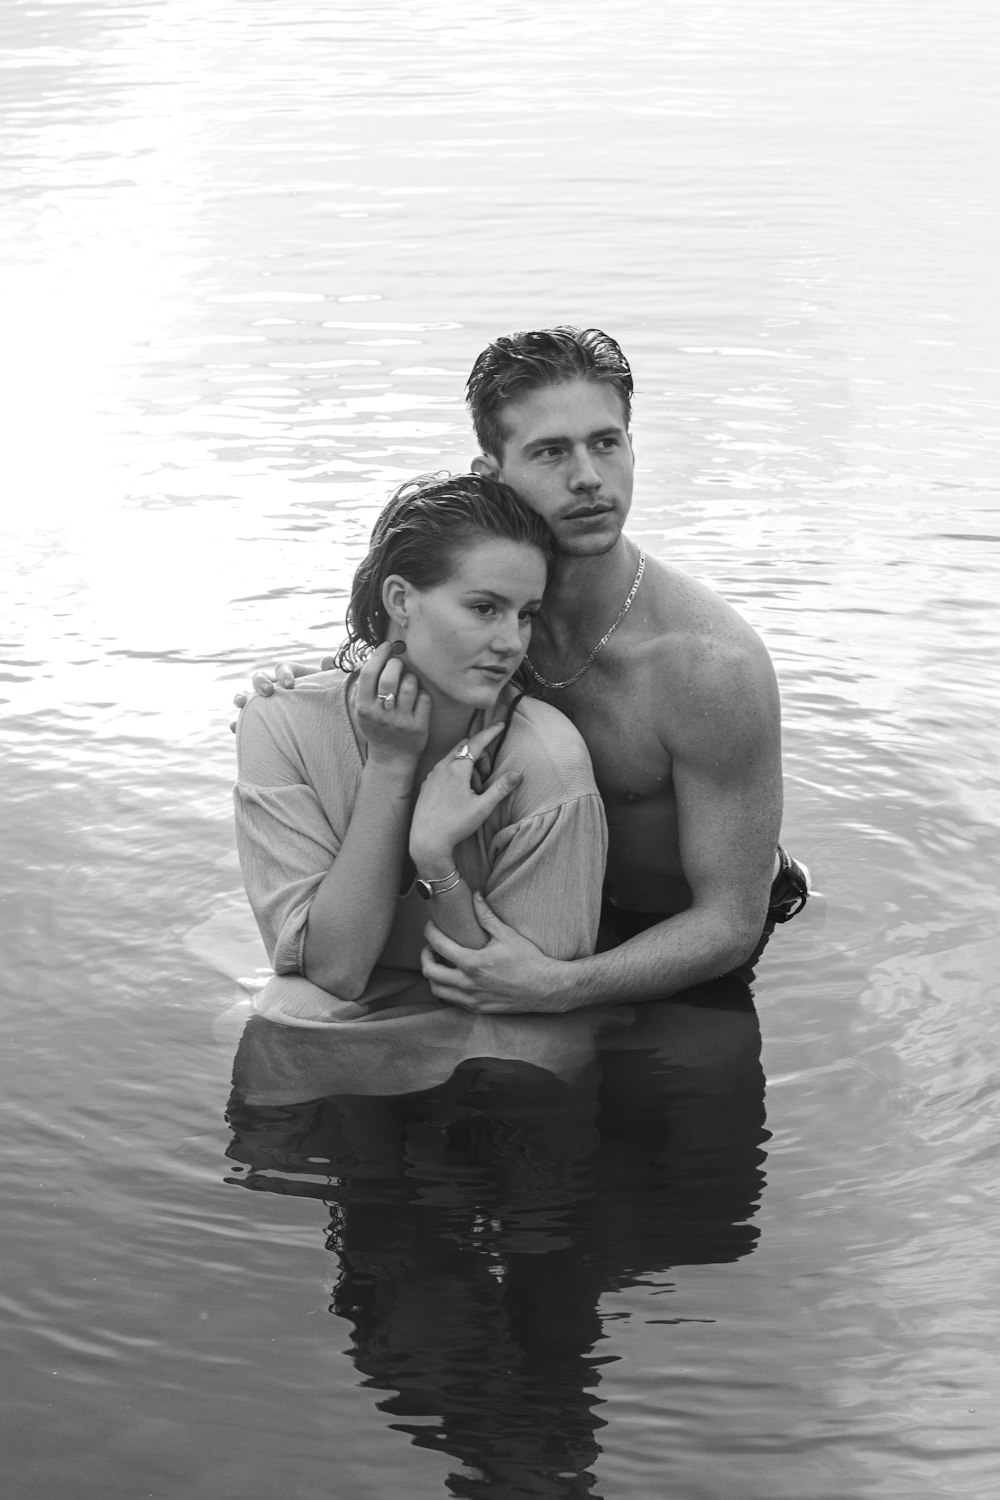 grayscale photo of man and woman on water